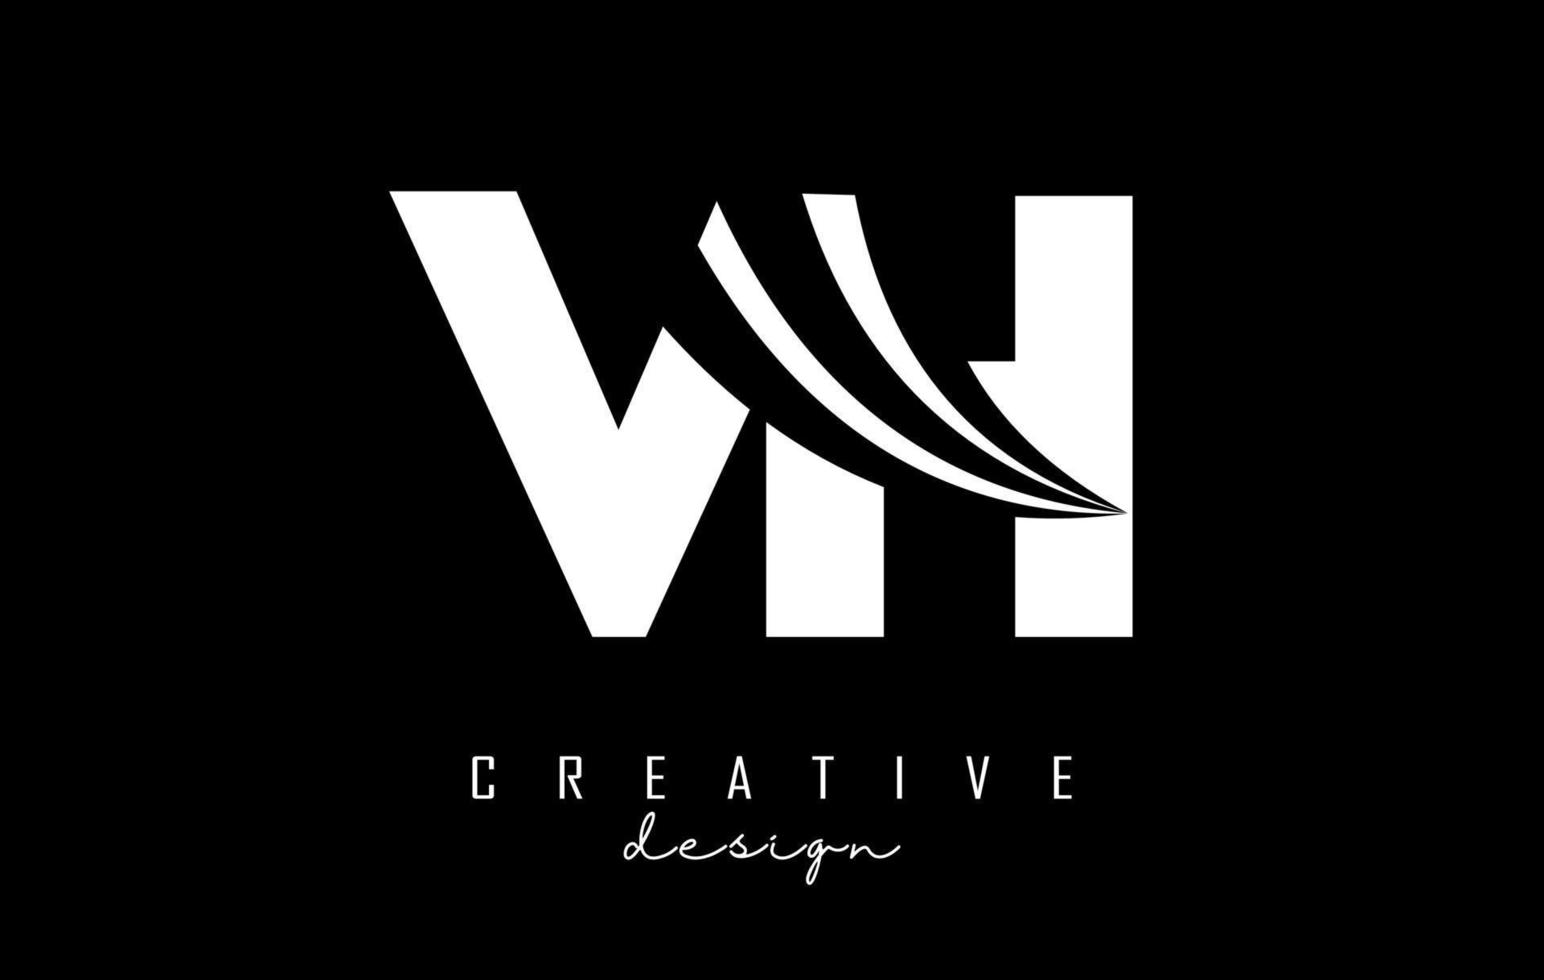 Creative white letters VH v h logo with leading lines and road concept design. Letters with geometric design. vector